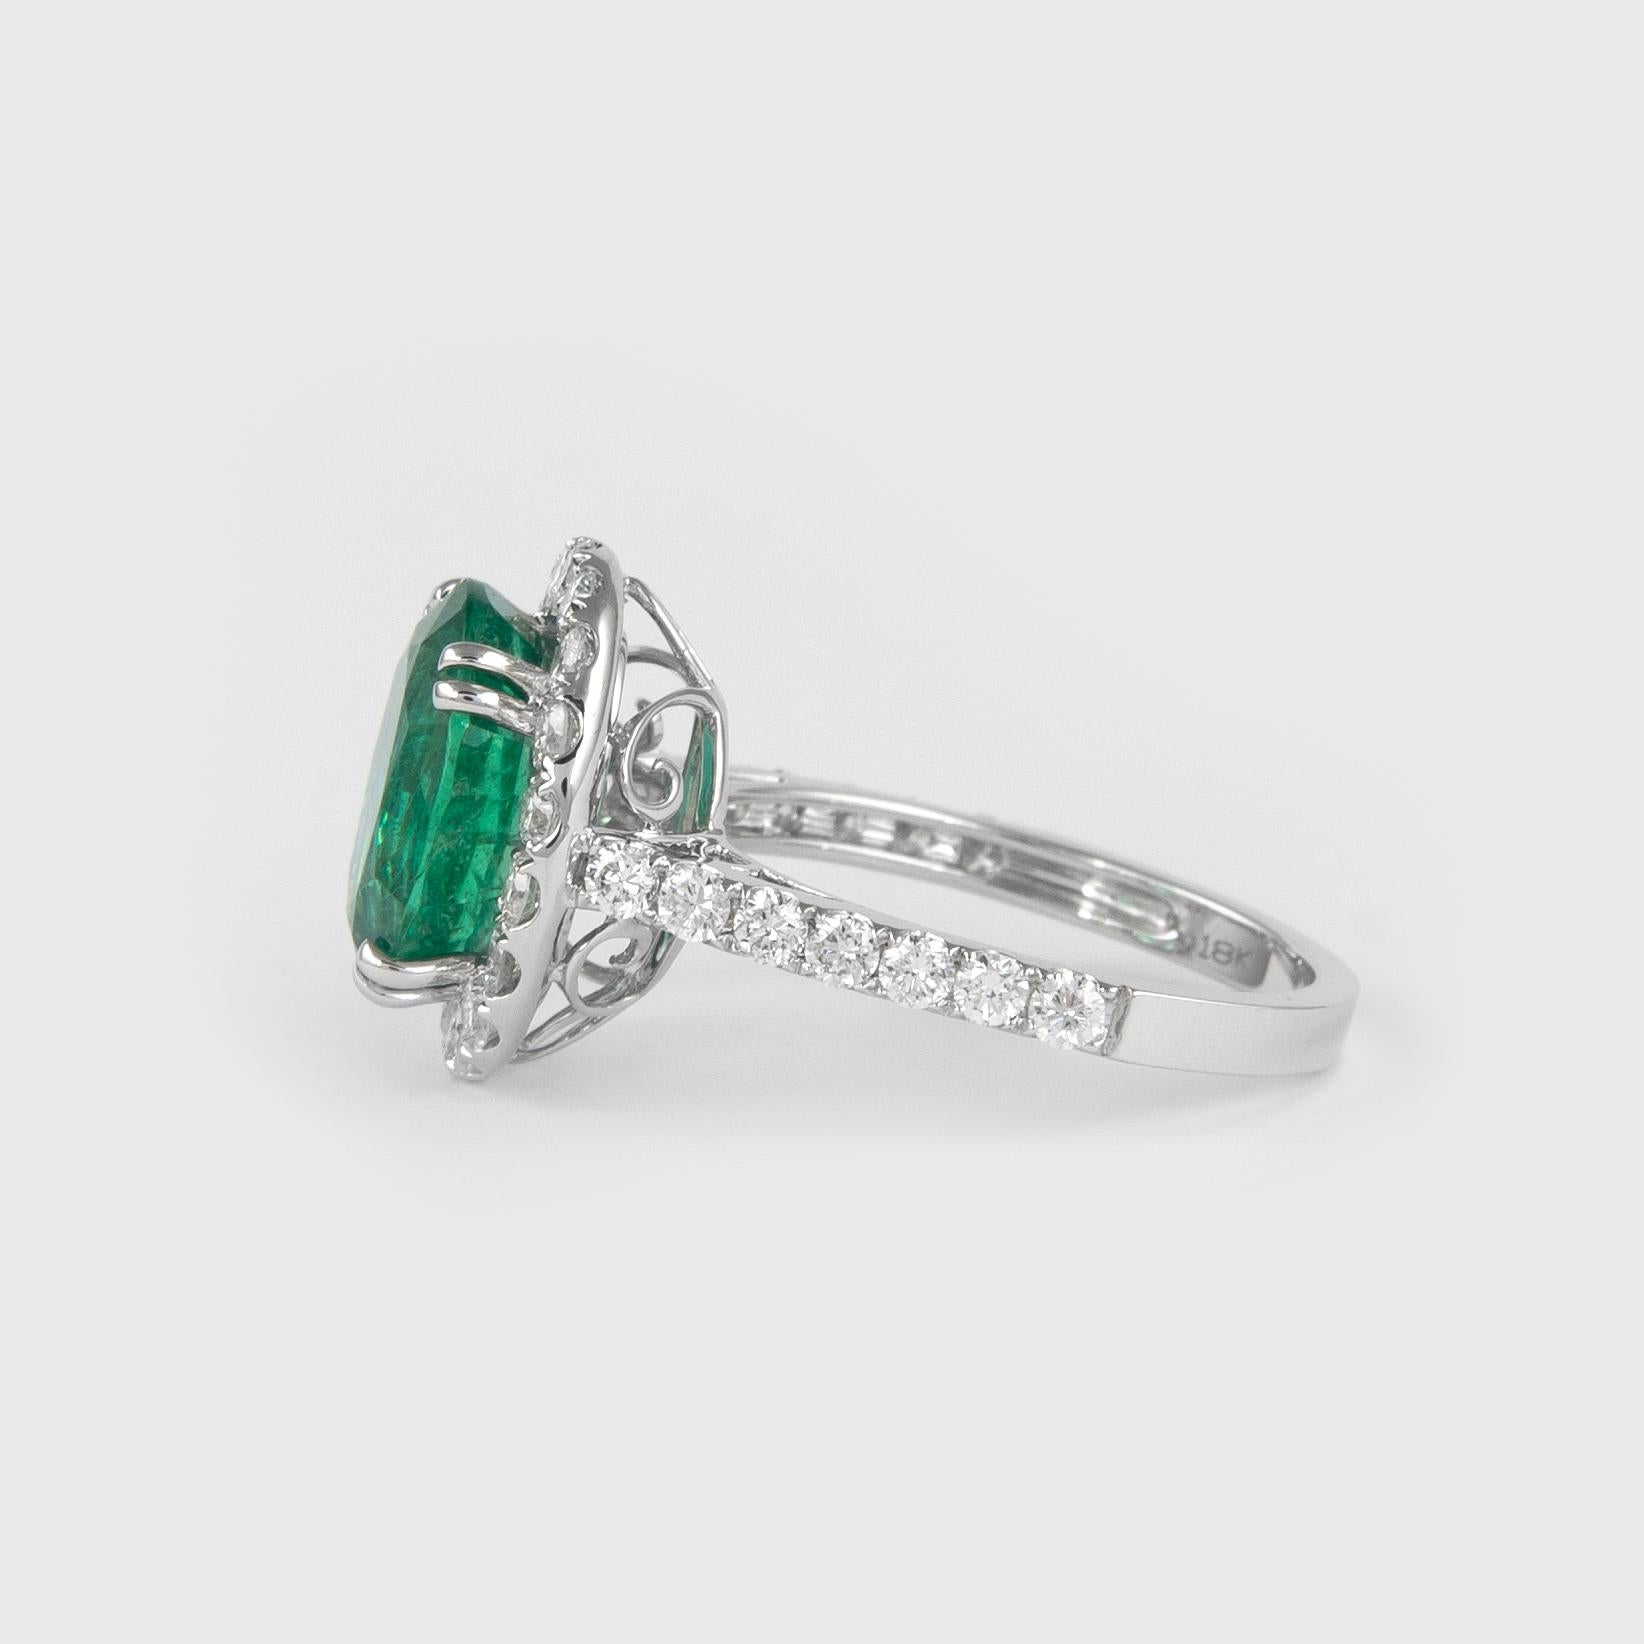 Oval Cut Alexander 4.05 Carat Emerald with Diamond Halo Ring 18 Karat White Gold For Sale